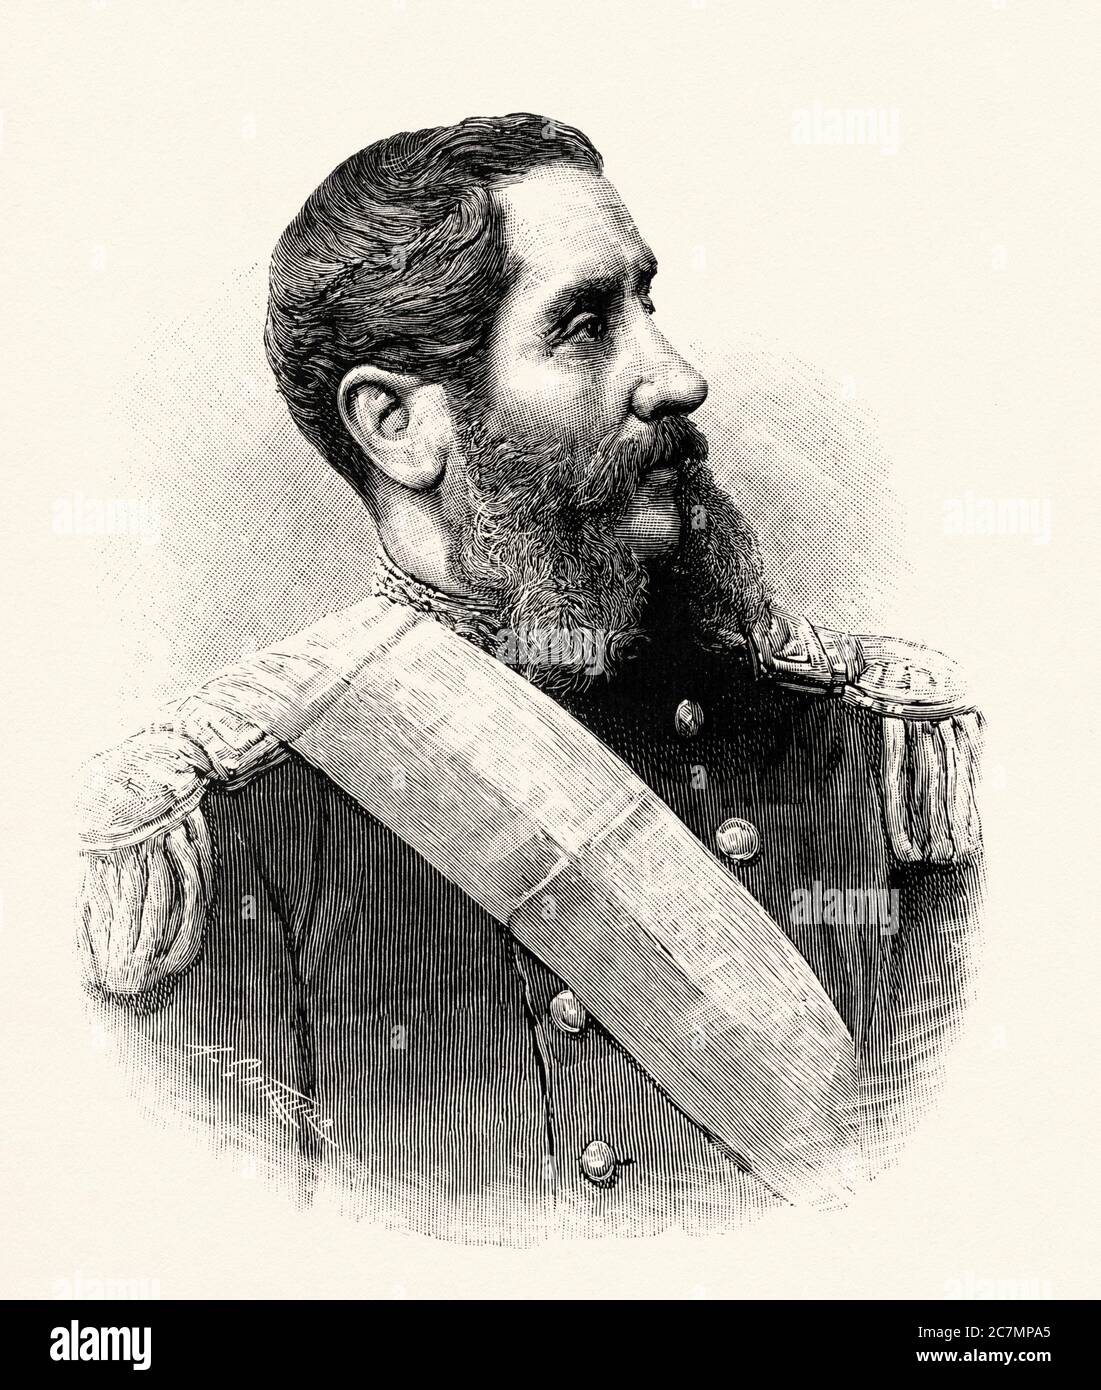 Portrait of Andres Avelino Caceres Dorregaray (Ayacucho 1833 - Lima 1923), was a Peruvian military man and politician who fought in the Pacific War and was Constitutional President of Peru. He is the patron of the Peruvian Army's Infantry Weapon. From La Ilustracion Española y Americana 1895 Stock Photo